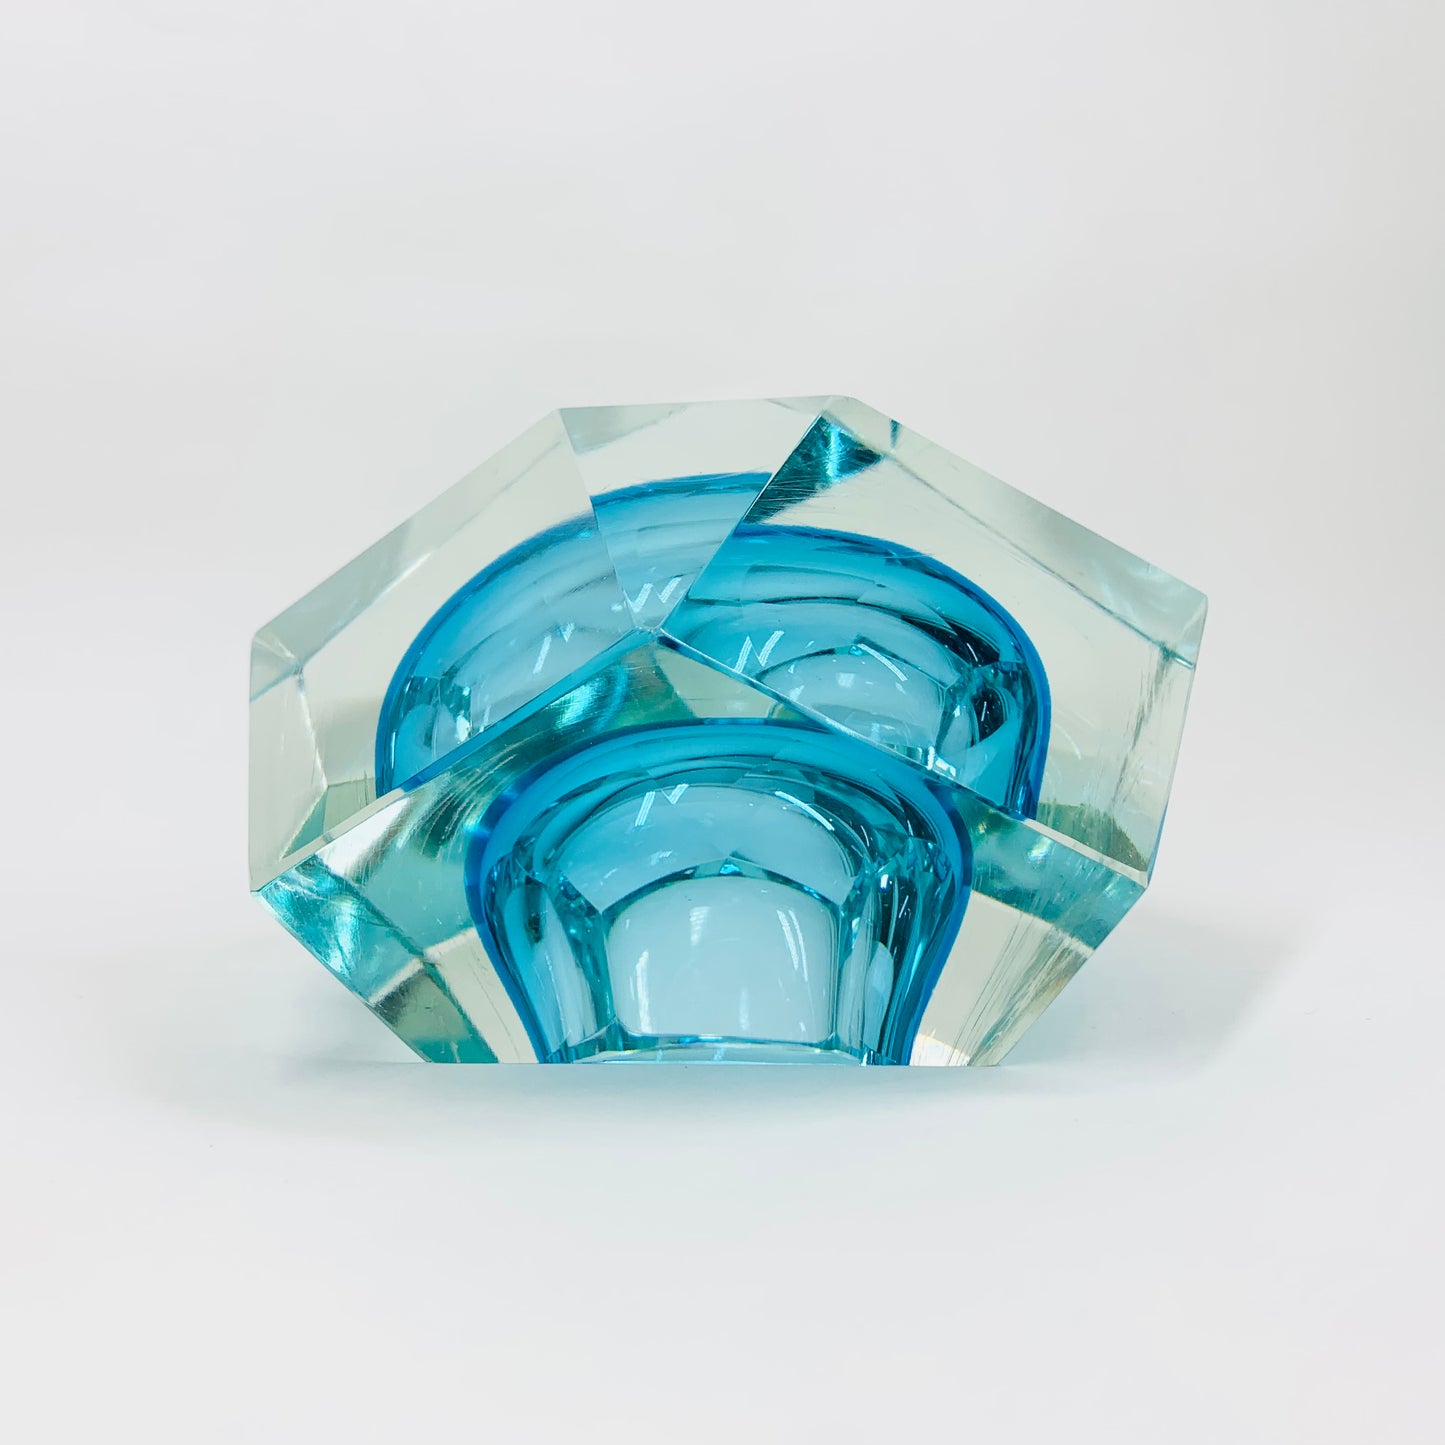 Extremely rare MCM blue Murano Sommerso faceted glass geode bowl by Mandruzatto